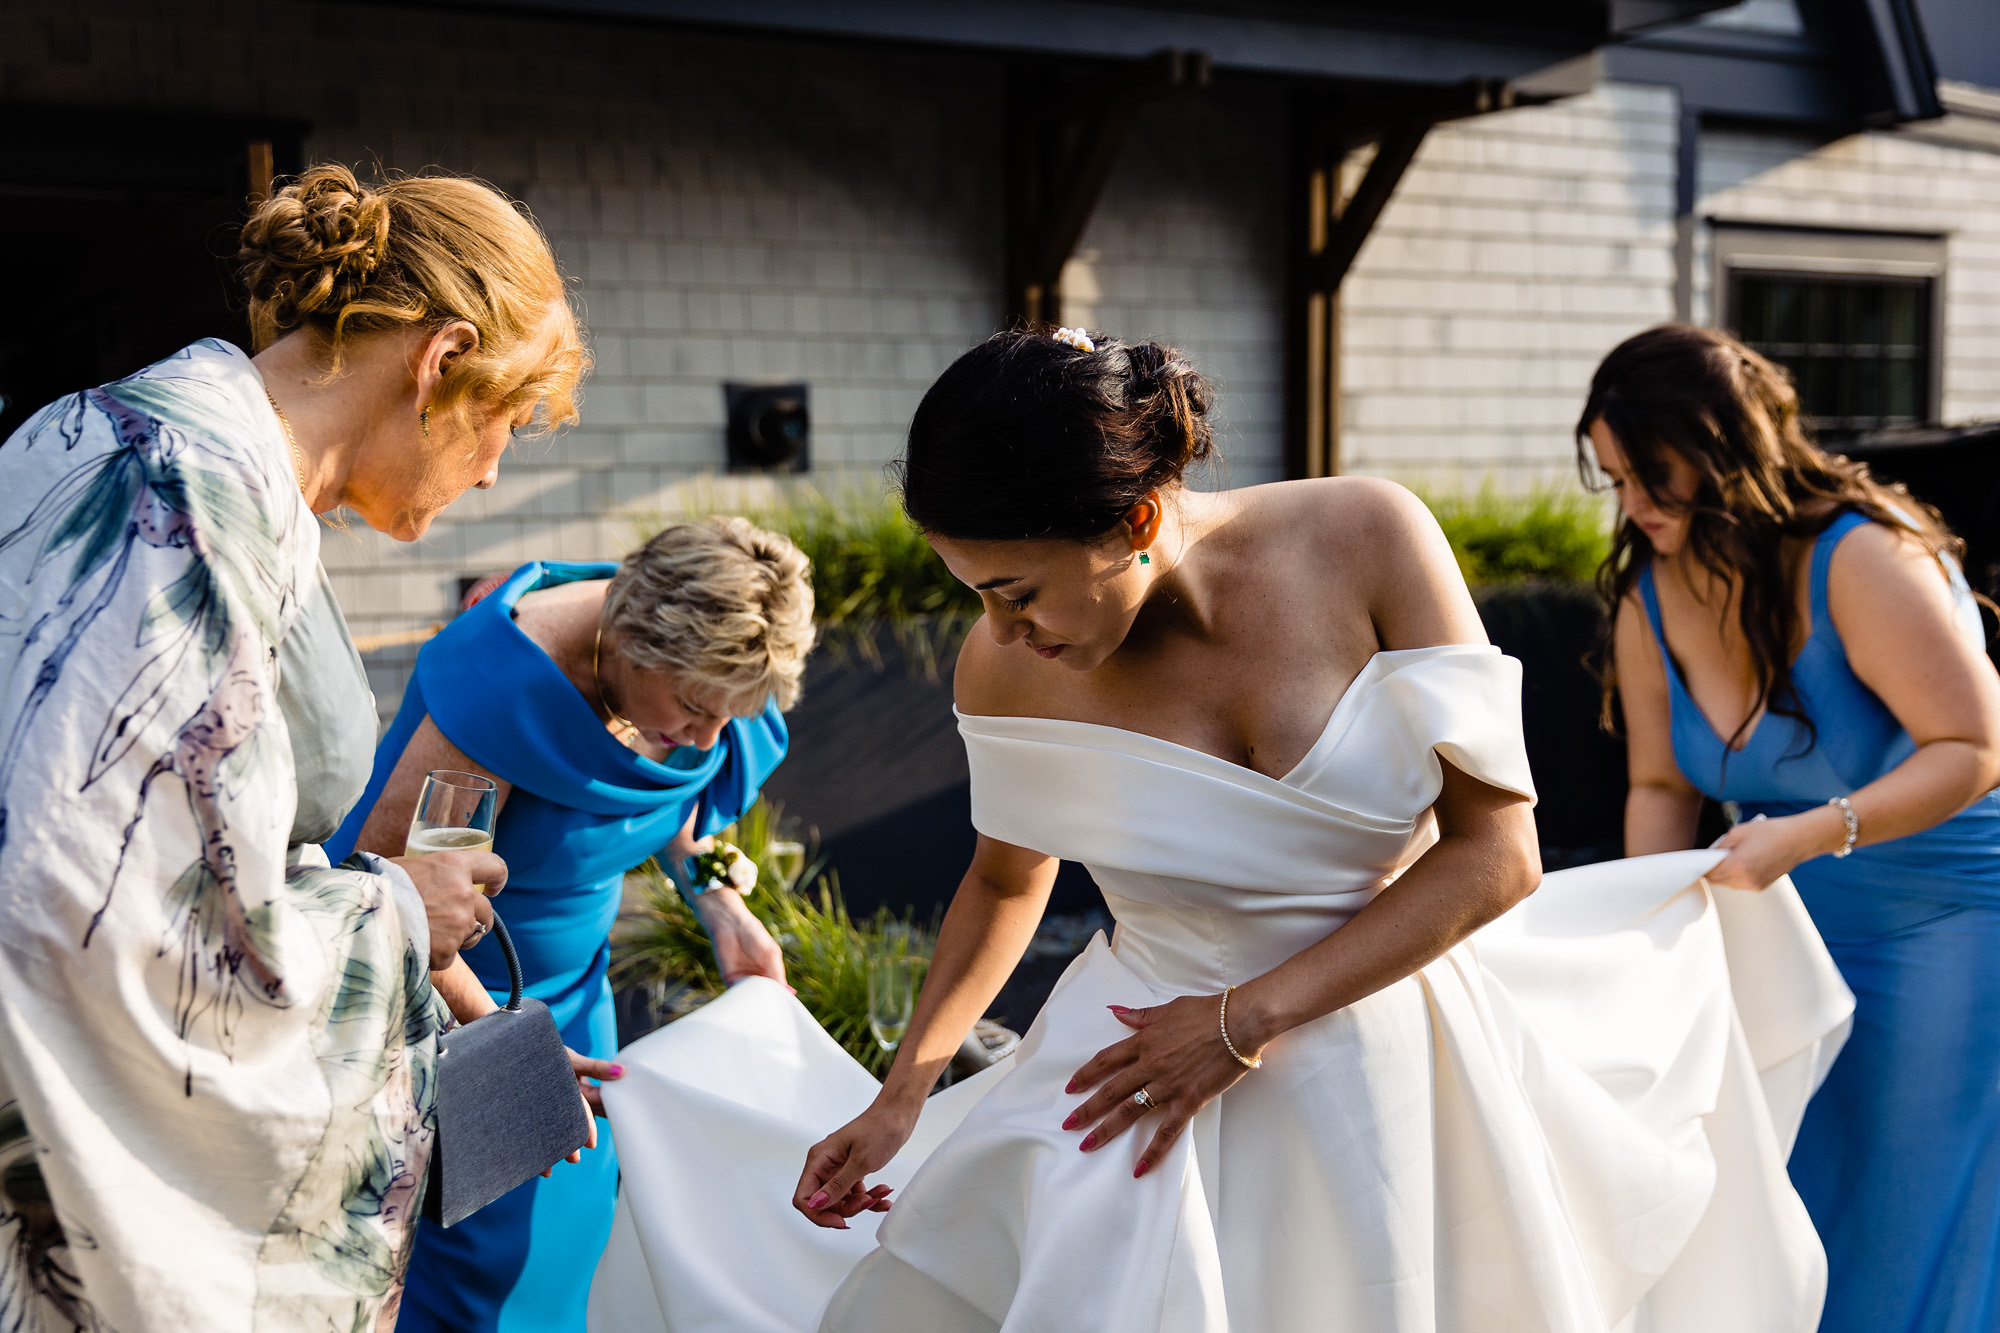 Friends and family of the bride help her bustle her wedding dress